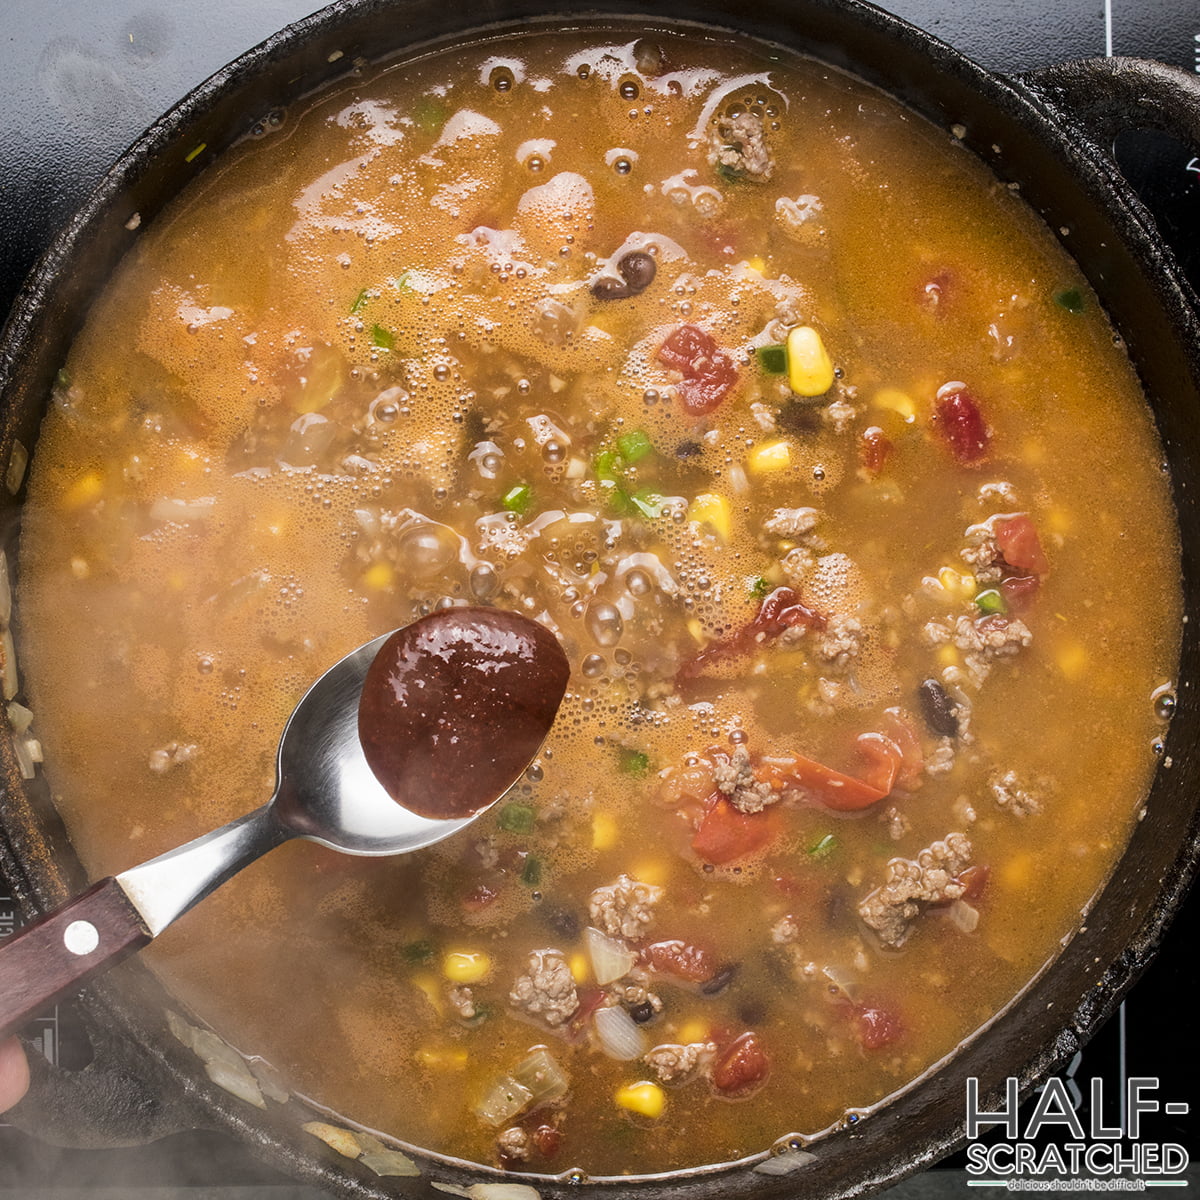 Adding hot sauce to the taco soup mixture